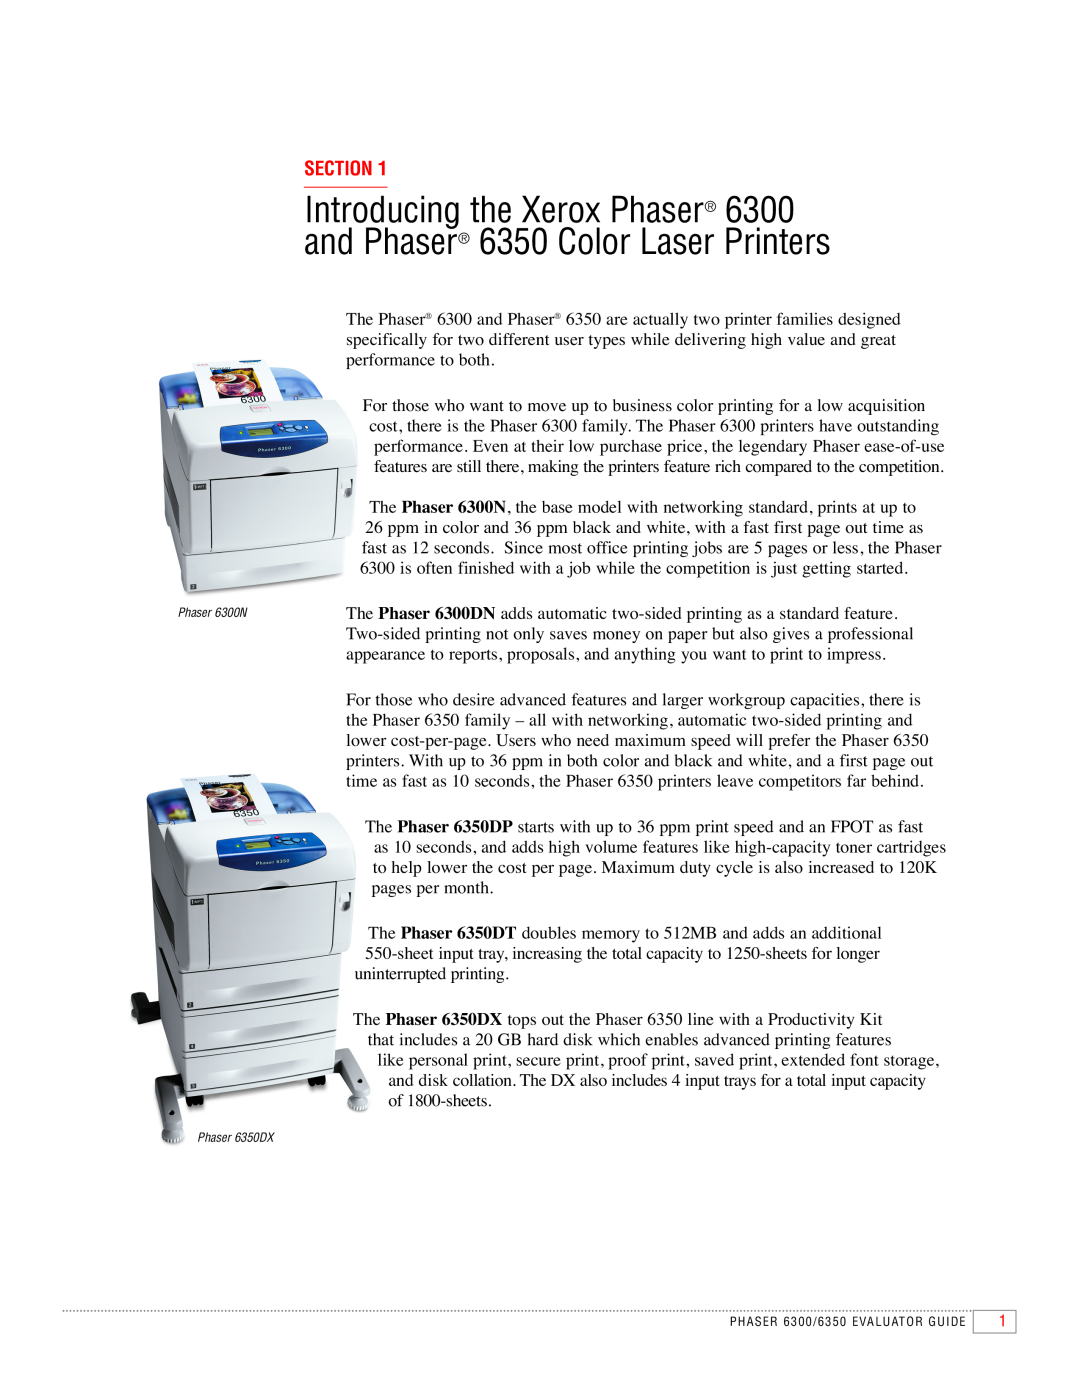 Xerox manual Section, Phaser 6300N Phaser 6350DX 